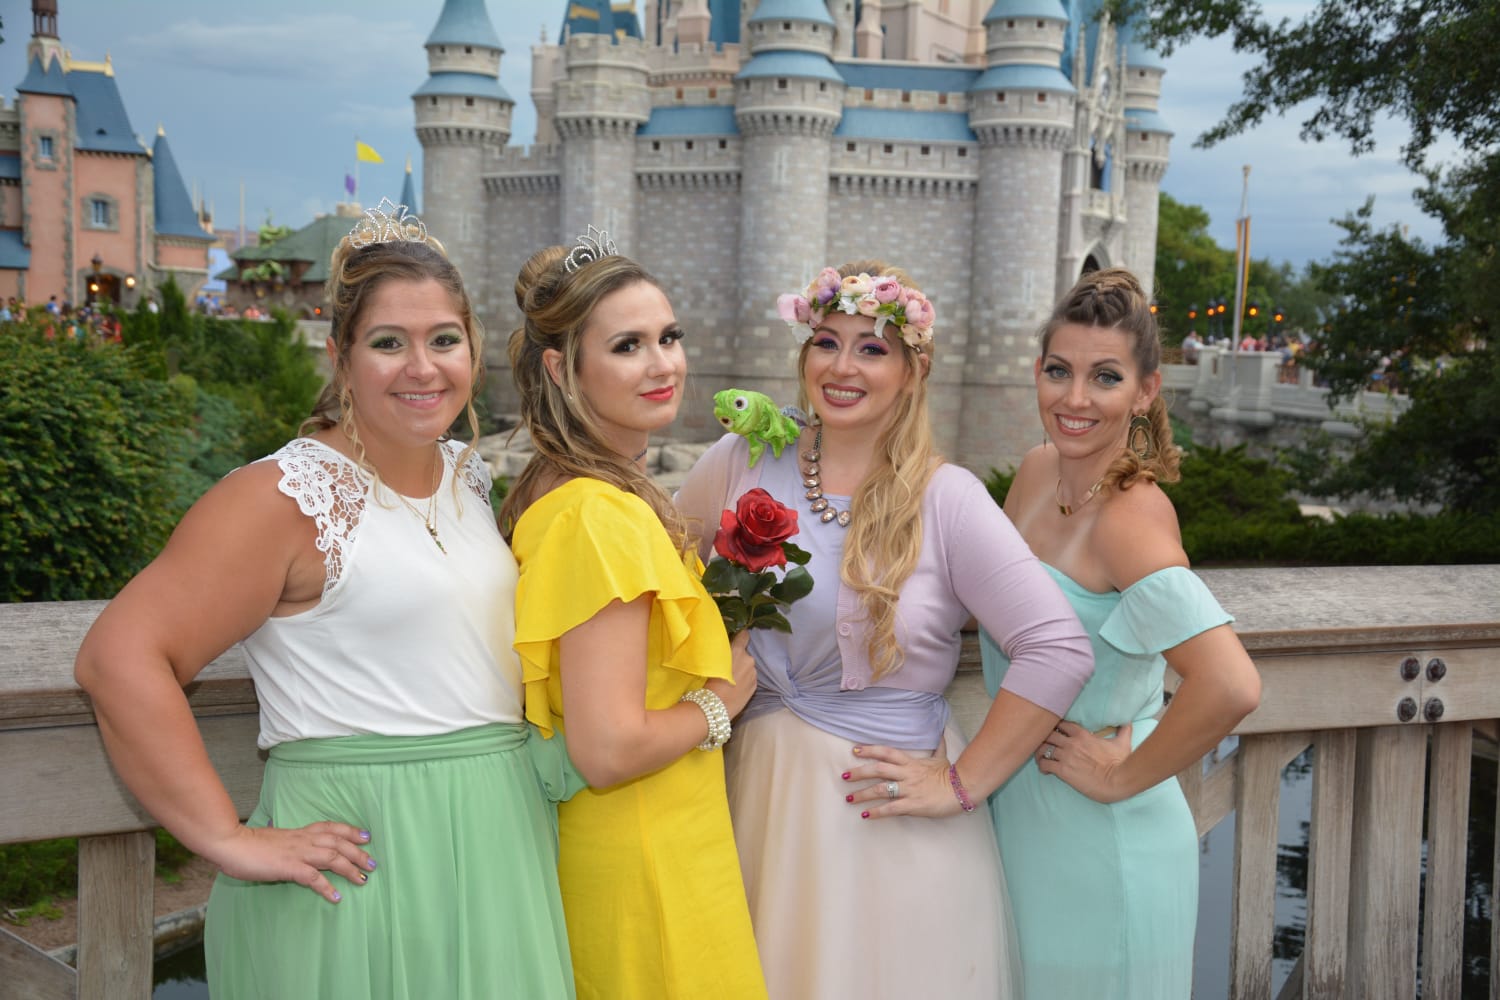 https://media-cldnry.s-nbcnews.com/image/upload/newscms/2018_27/1350404/disney_princess_character_couture_today_180703_01.jpg